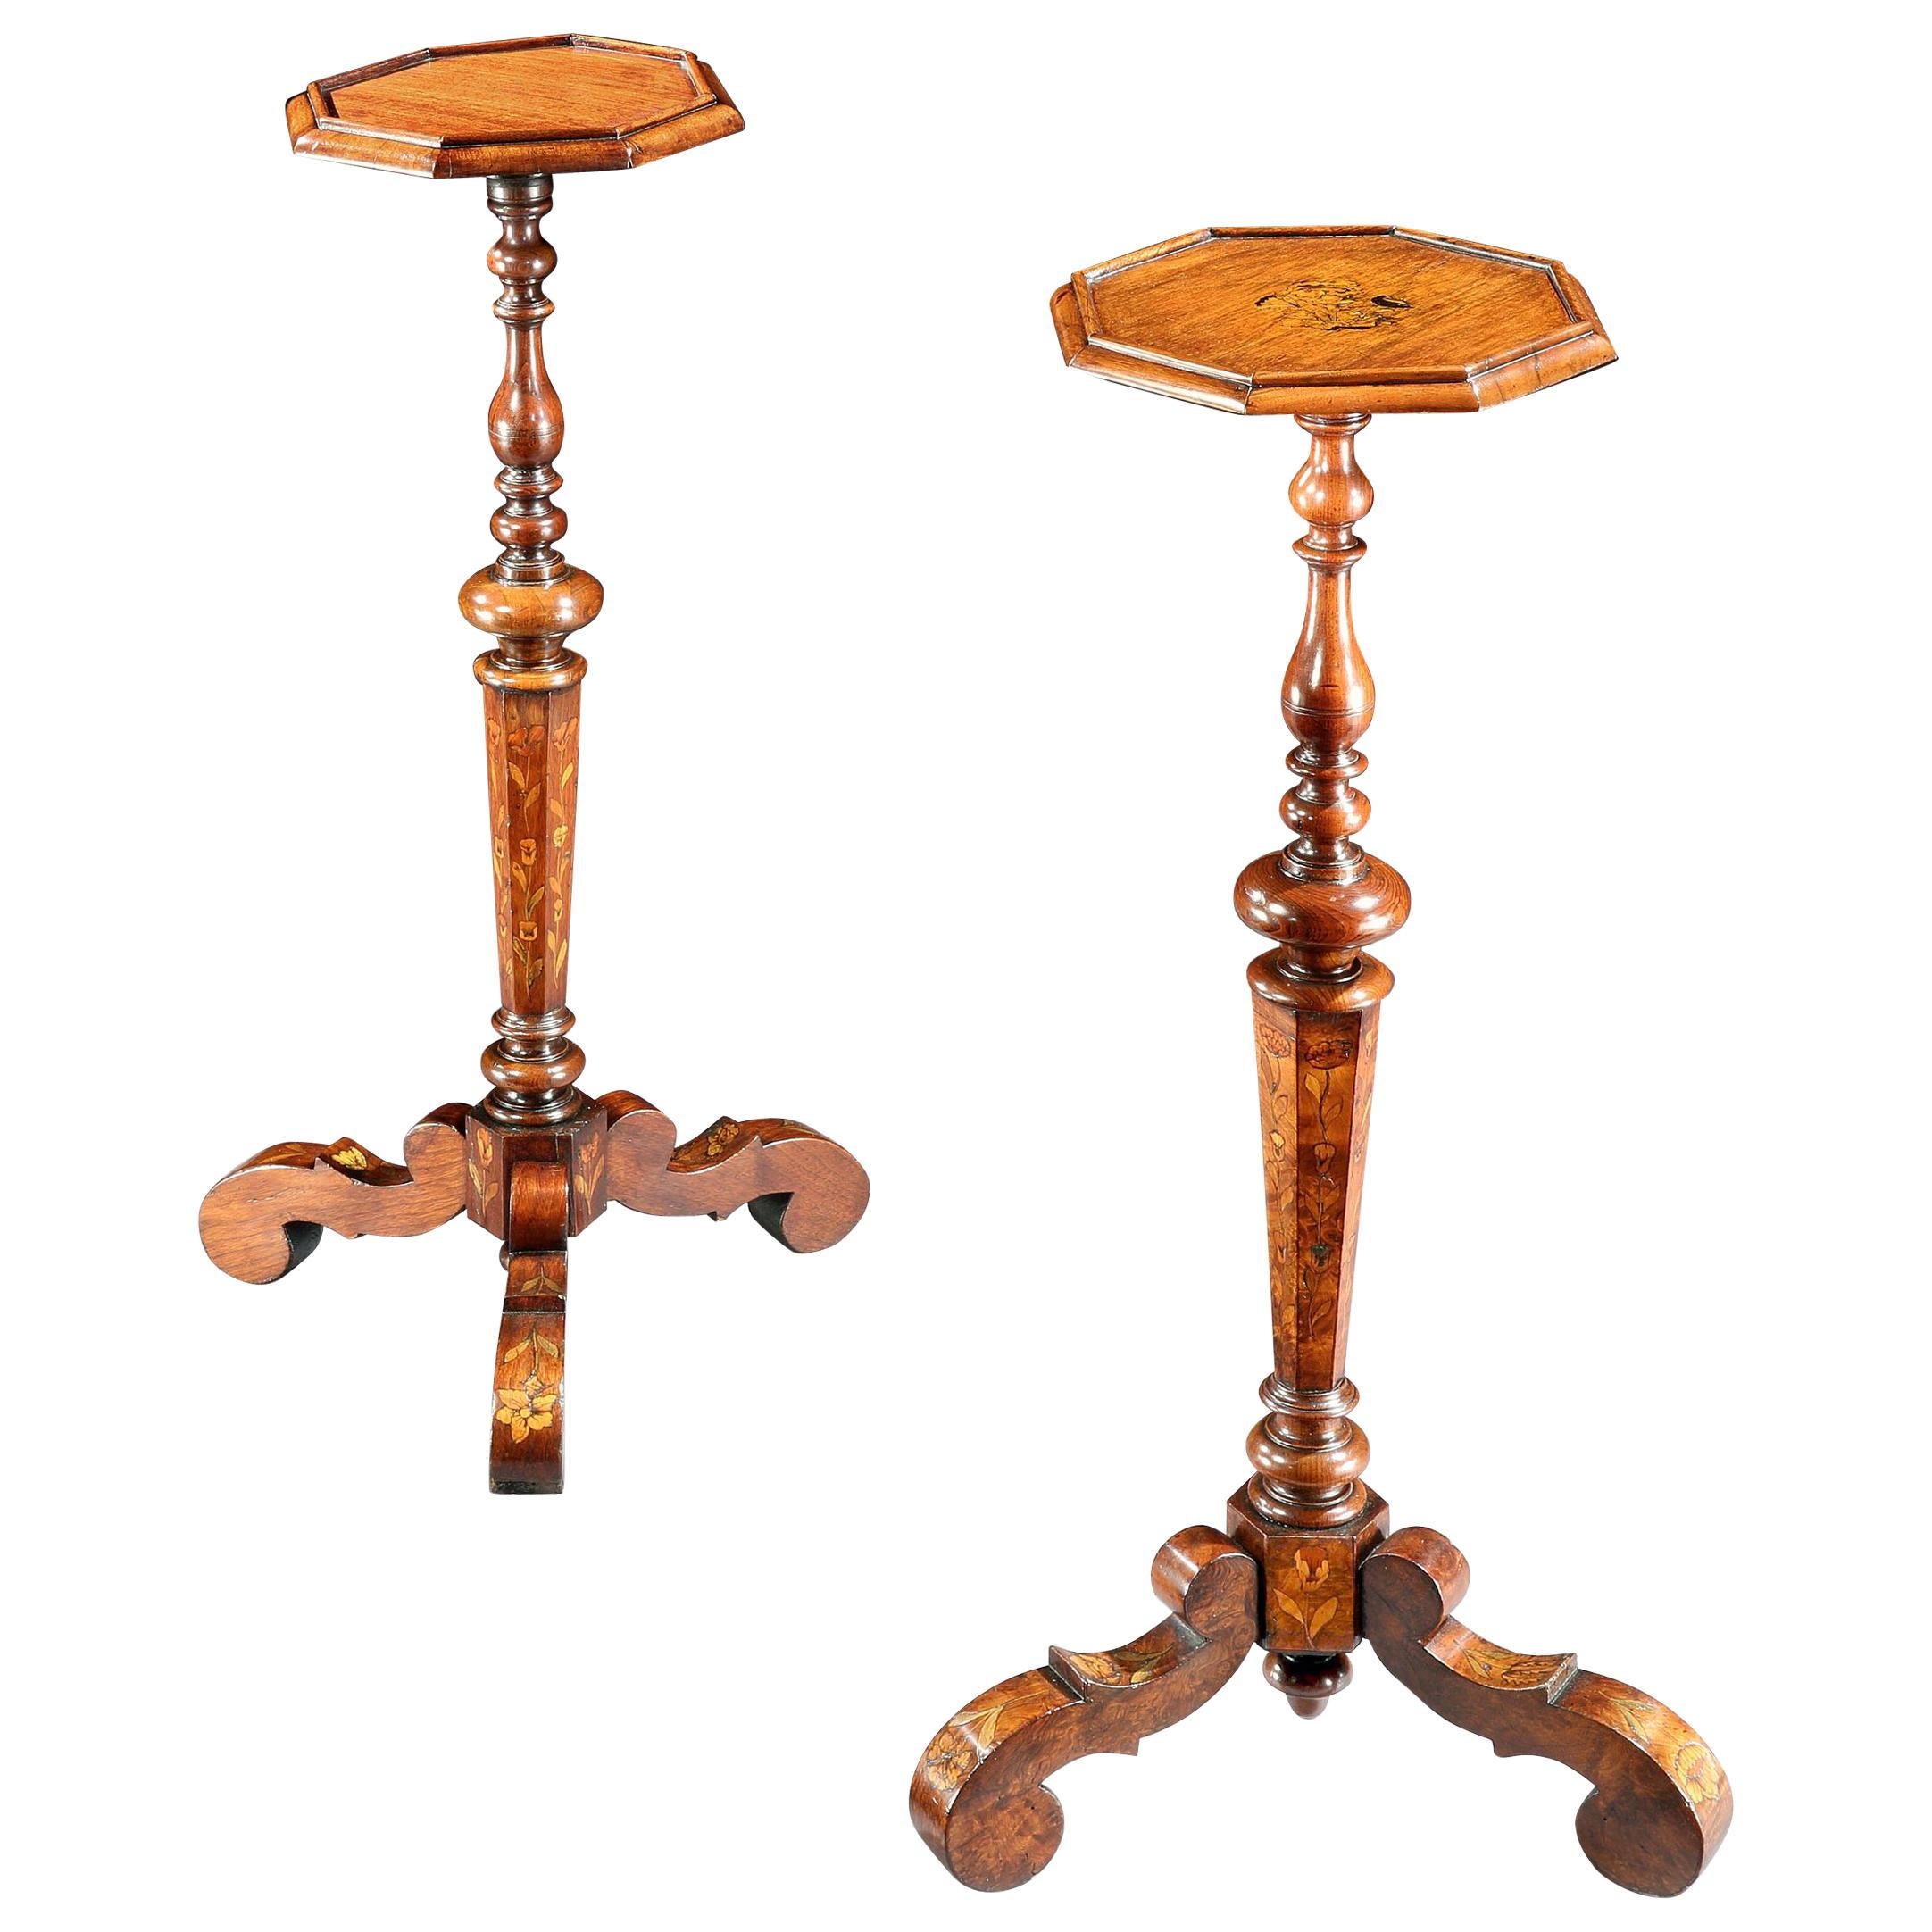 Near Pair of Candle Stands or Torchères, Late 17th Century, English